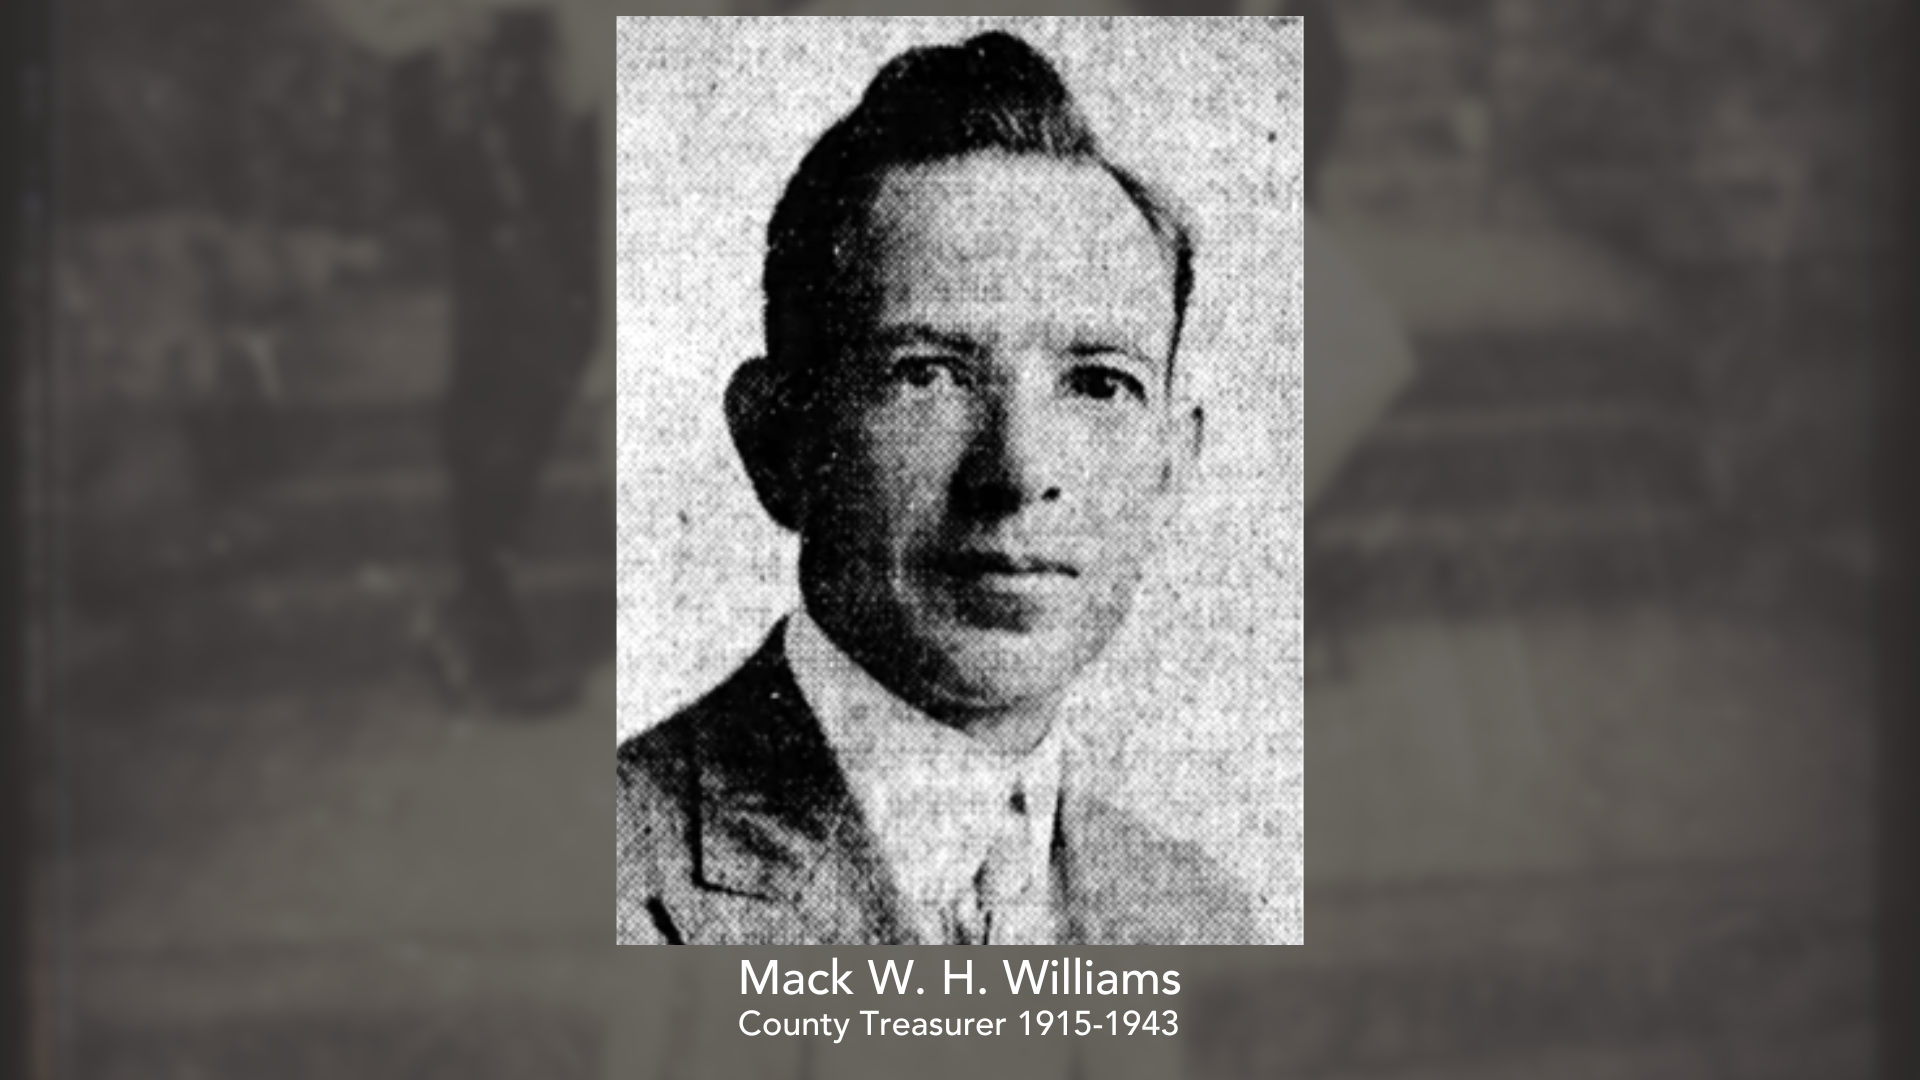 A black and white vintage grainy photo of Mack W. H. Williams. with the date of being County Treasurer 1915-1943.